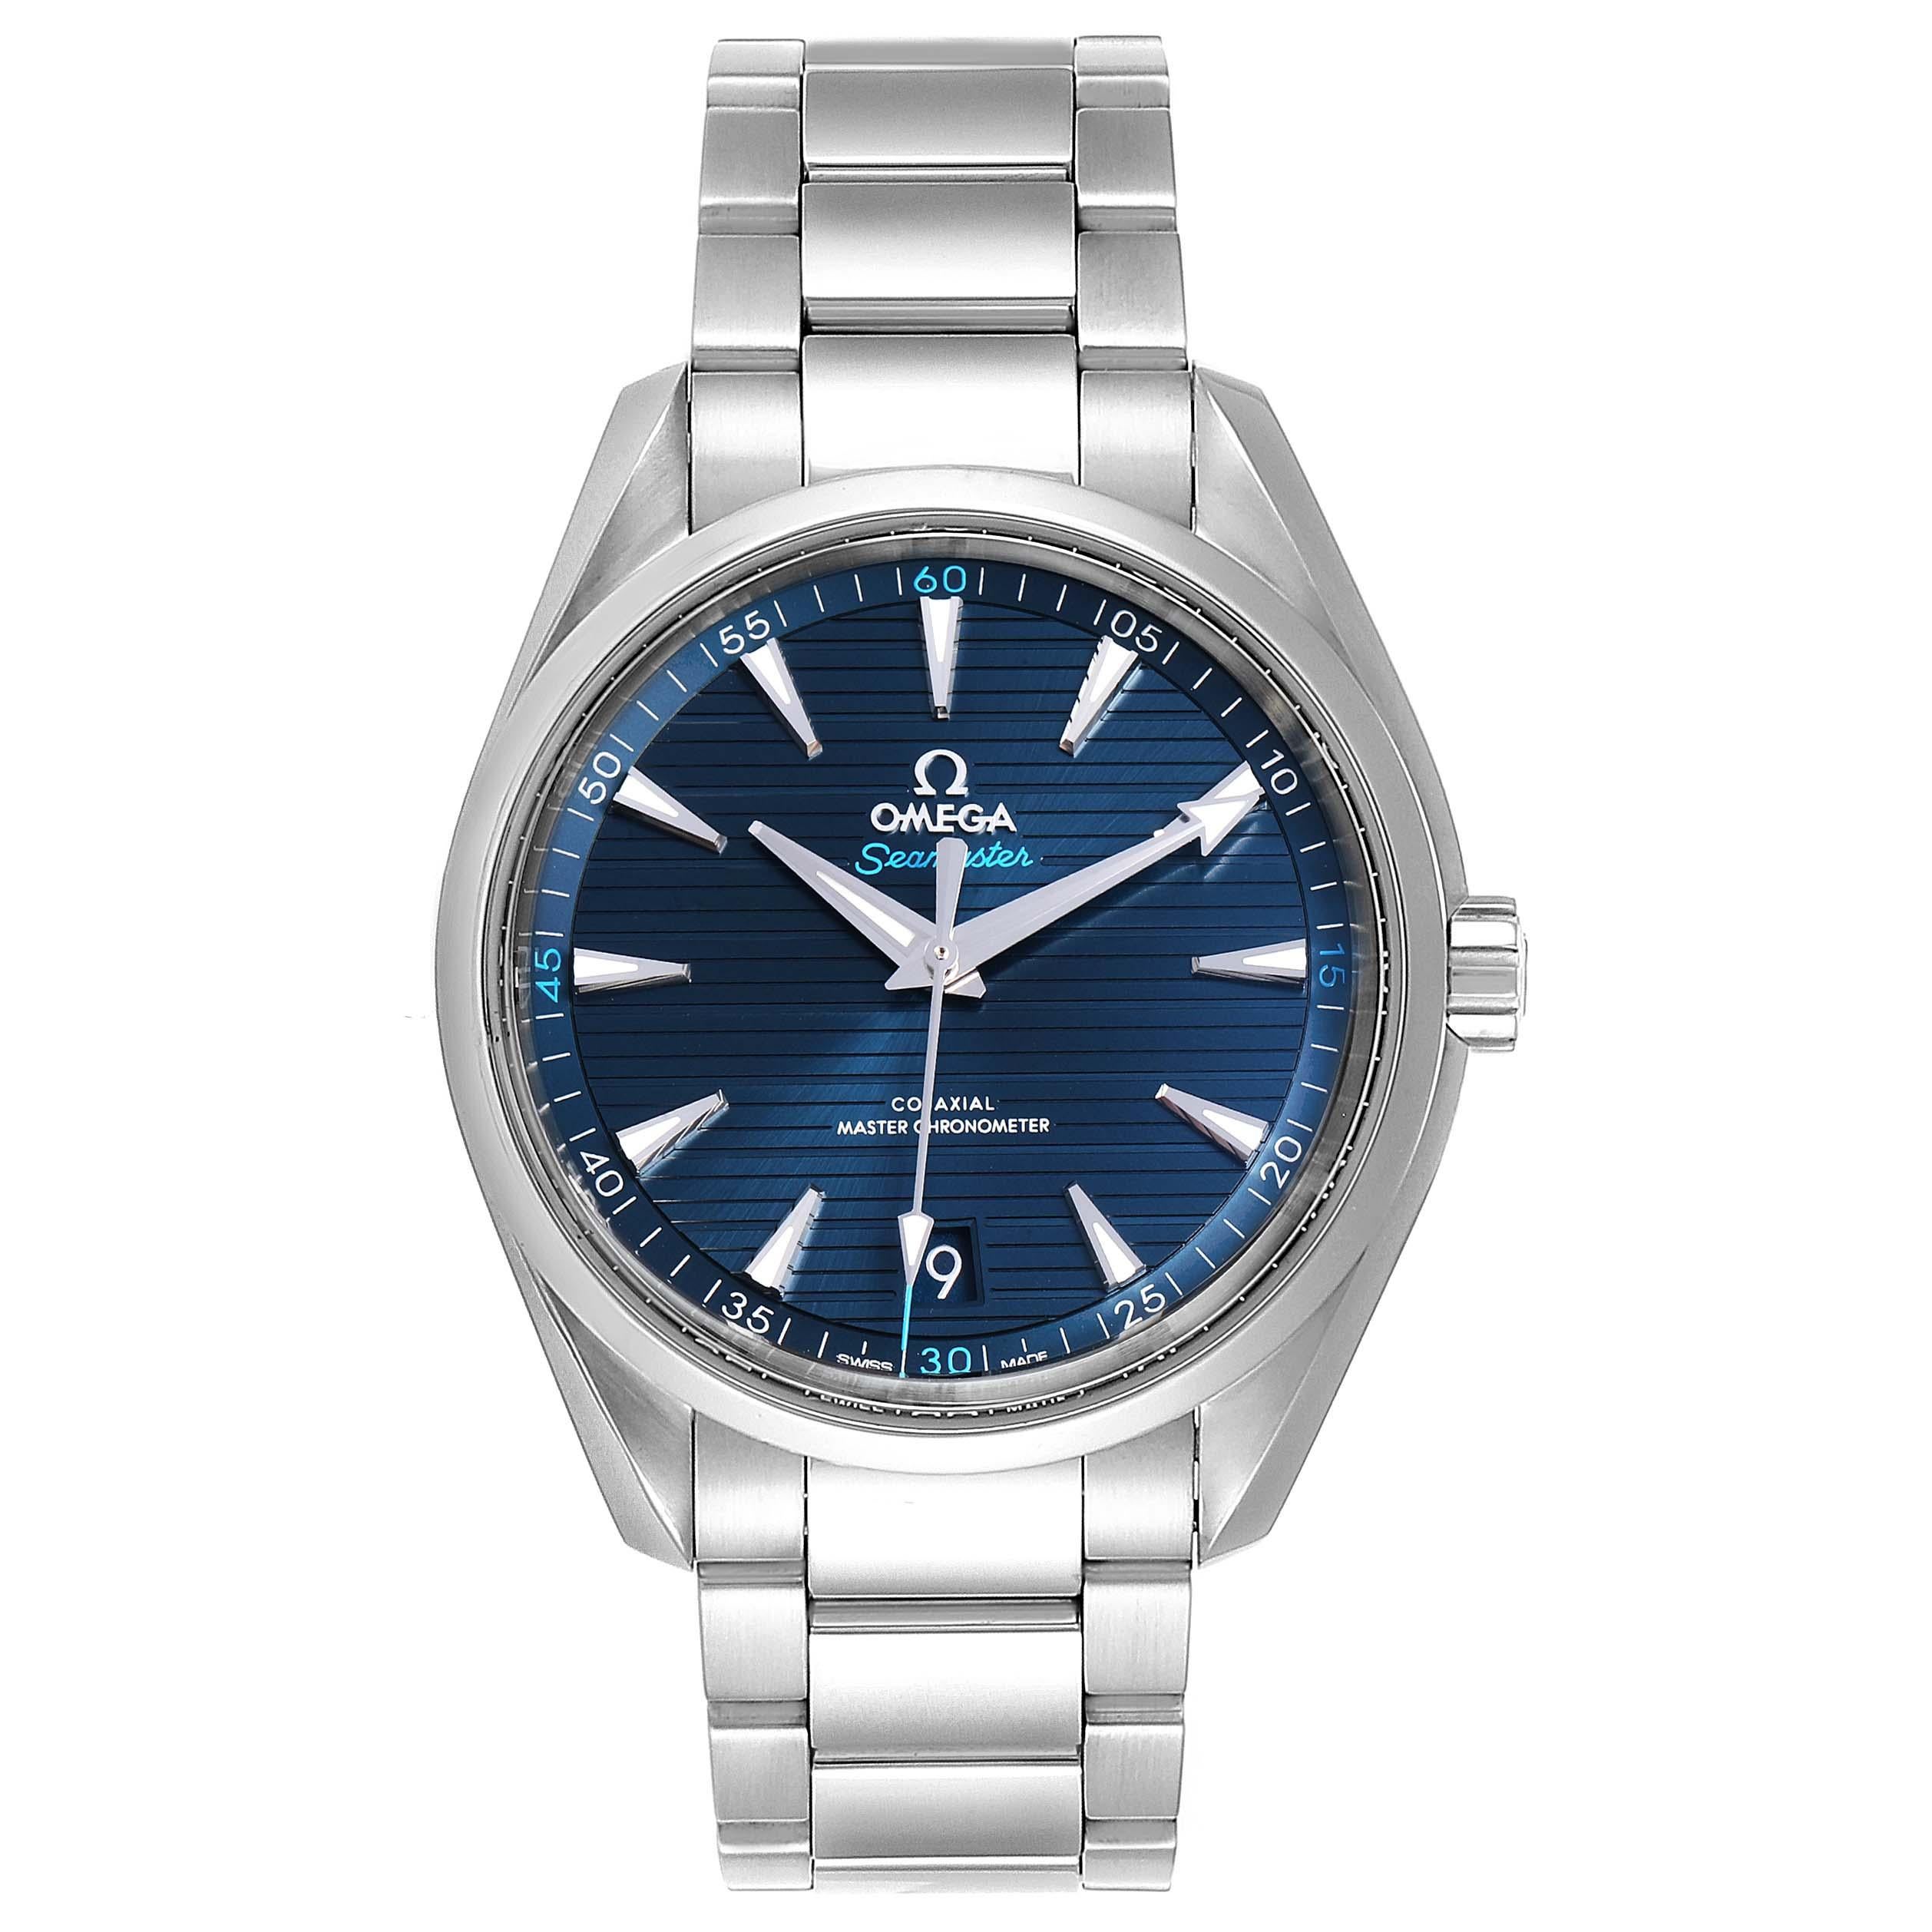 Omega Seamaster Aqua Terra Blue Dial Watch 220.10.41.21.03.001 Box Card. Automatic self-winding movement. Stainless steel round case 41.0 mm in diameter. Case thicknes 13.2. Transparent case back. Stainless steel bezel. Scratch resistant sapphire